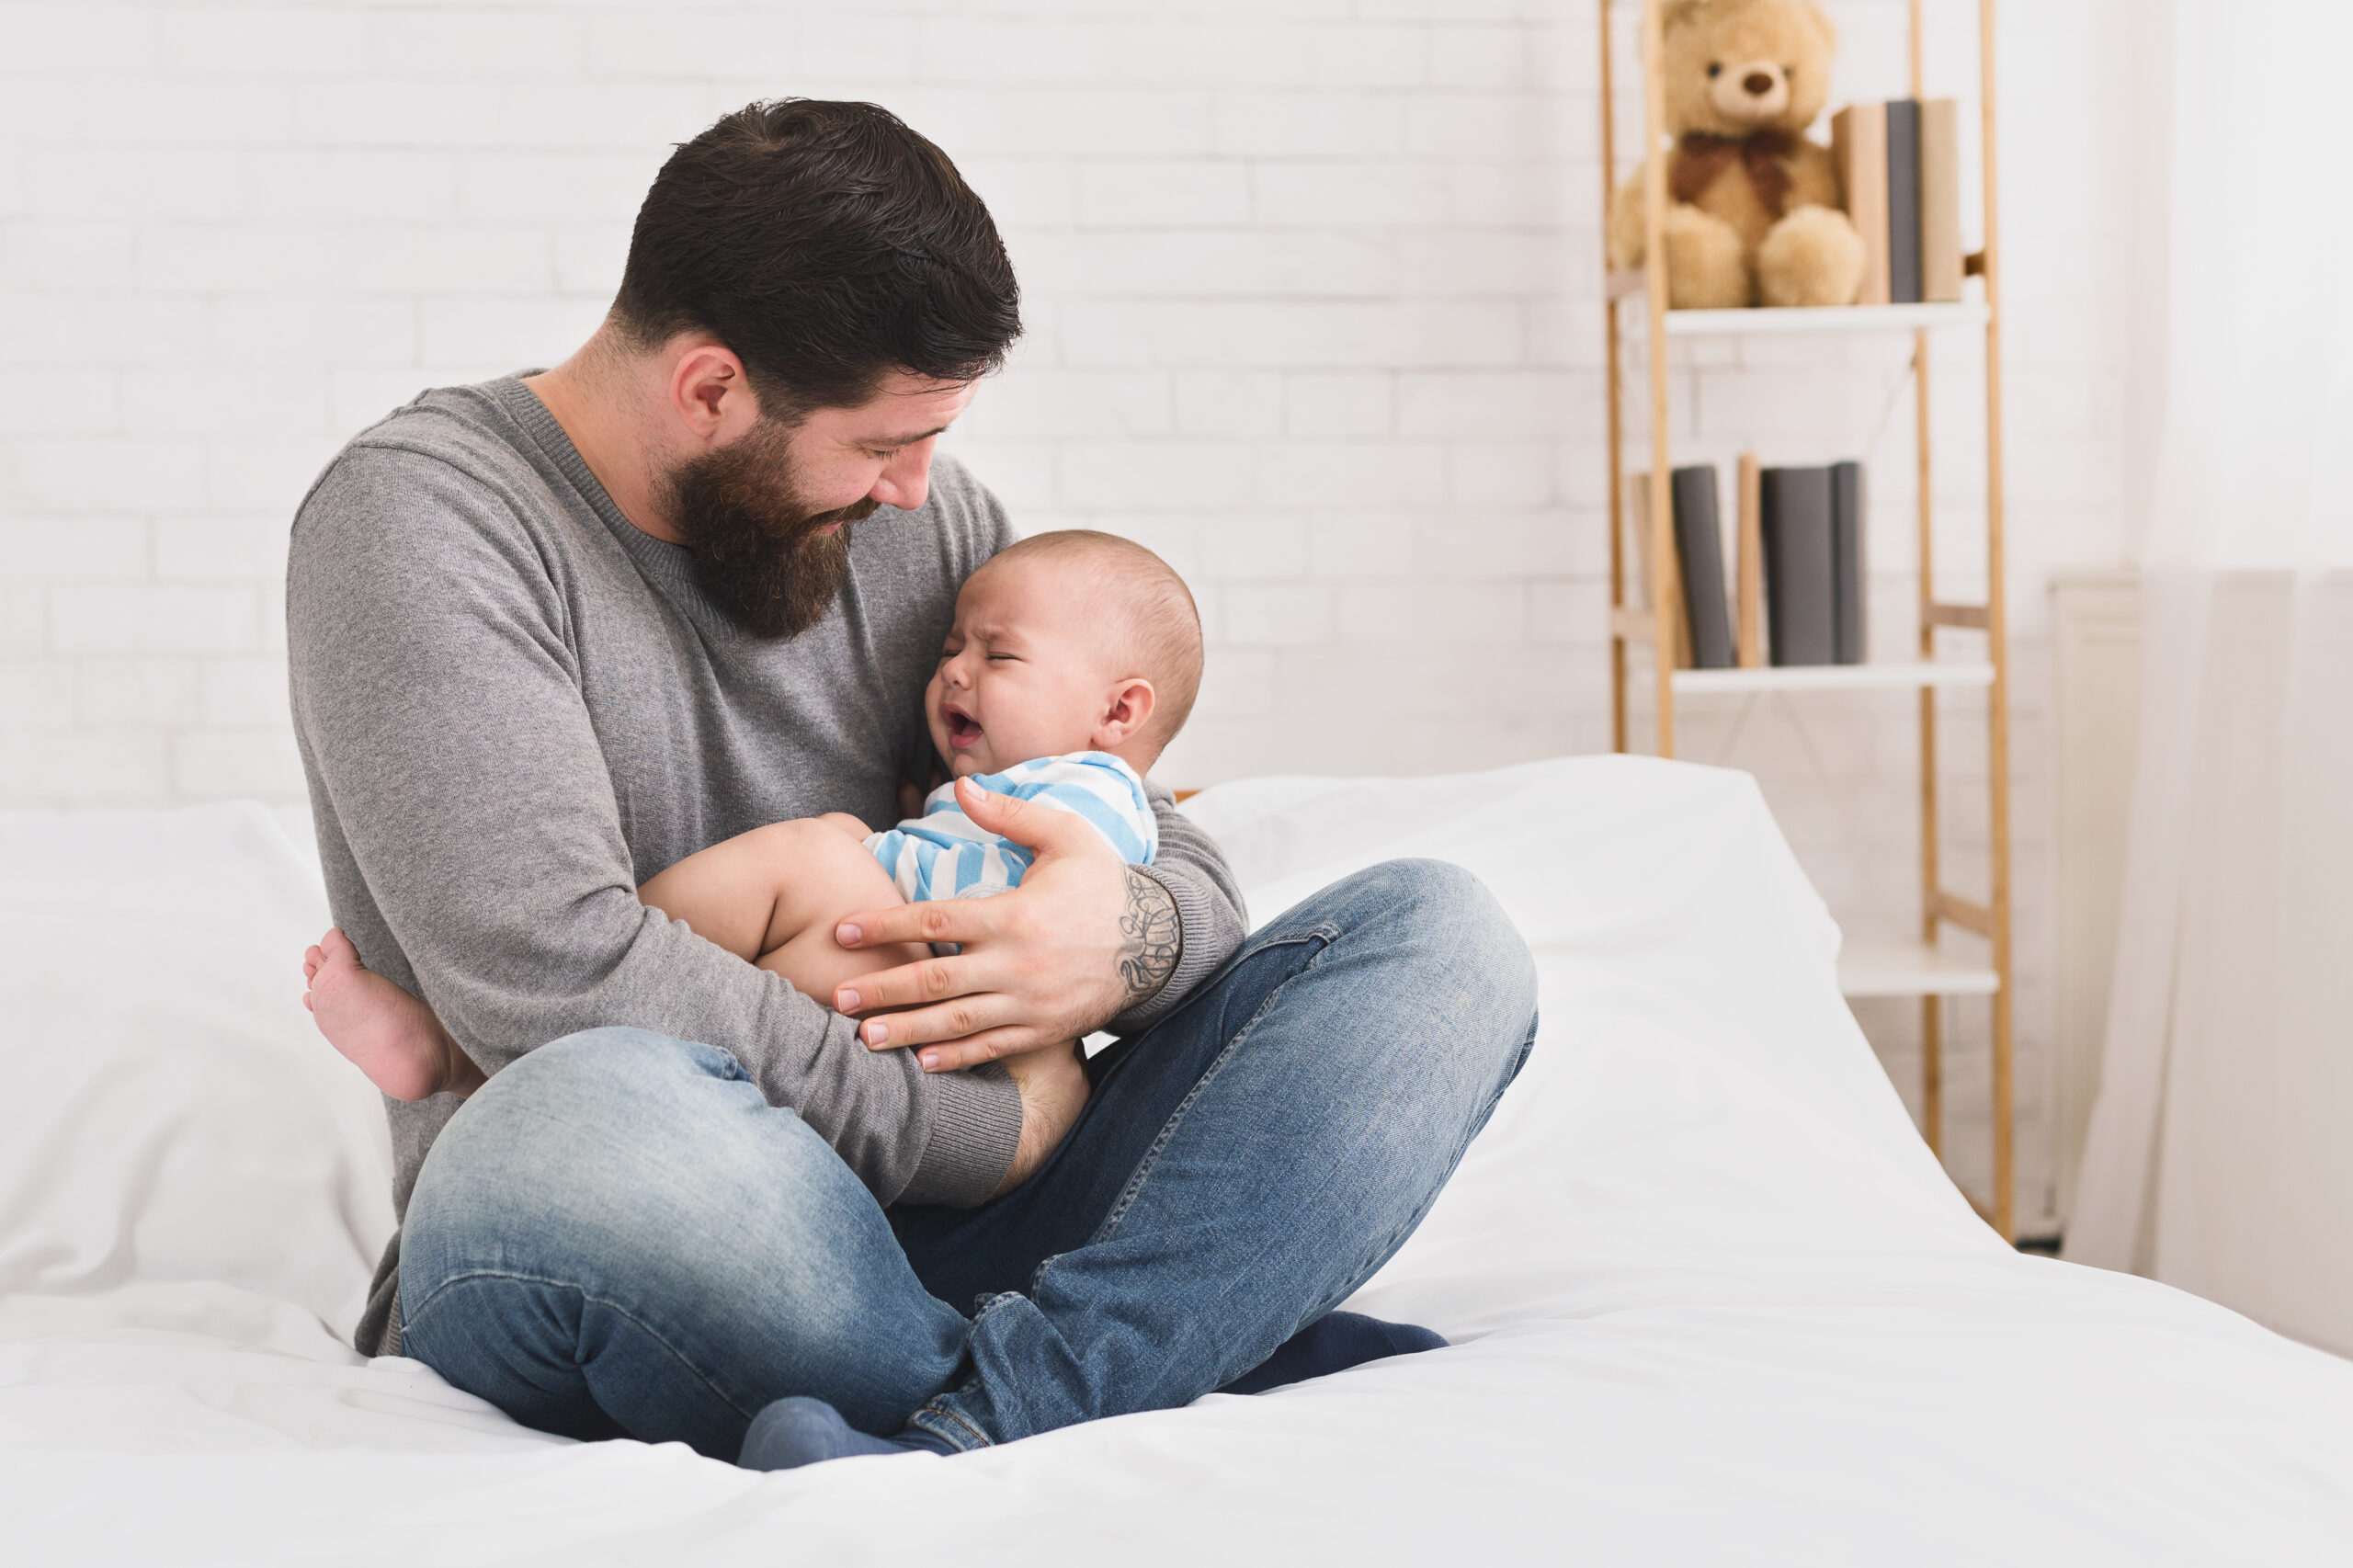 As both advice for new parents and parents with experience, we detail how to cope with a crying baby and how to keep those tears from taking a toll.